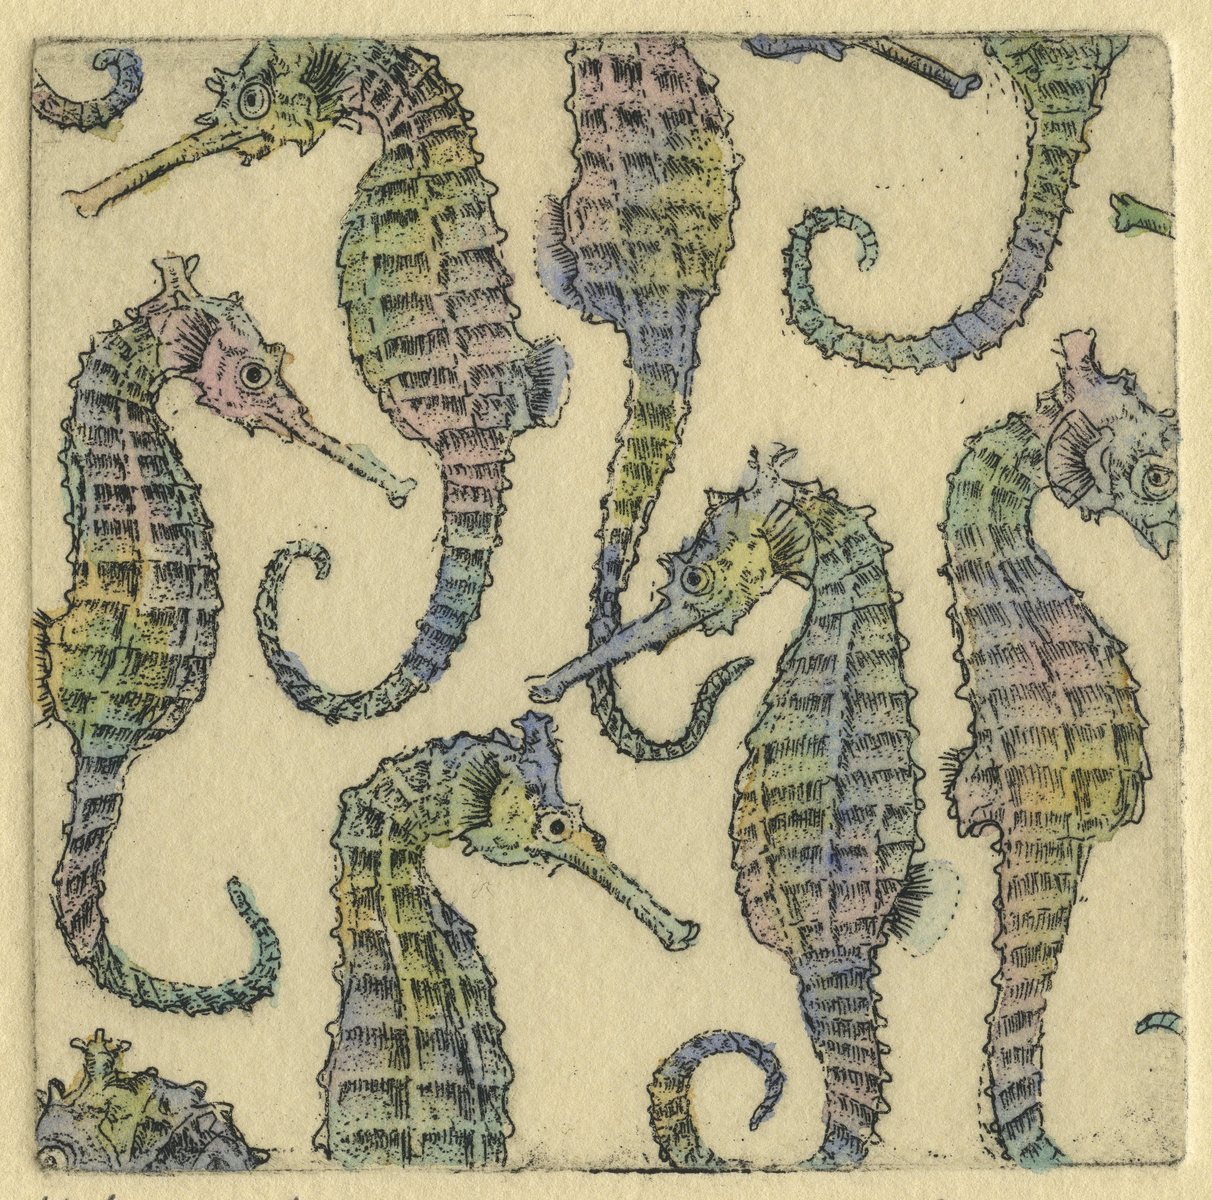 Seahorses : Congregated Images